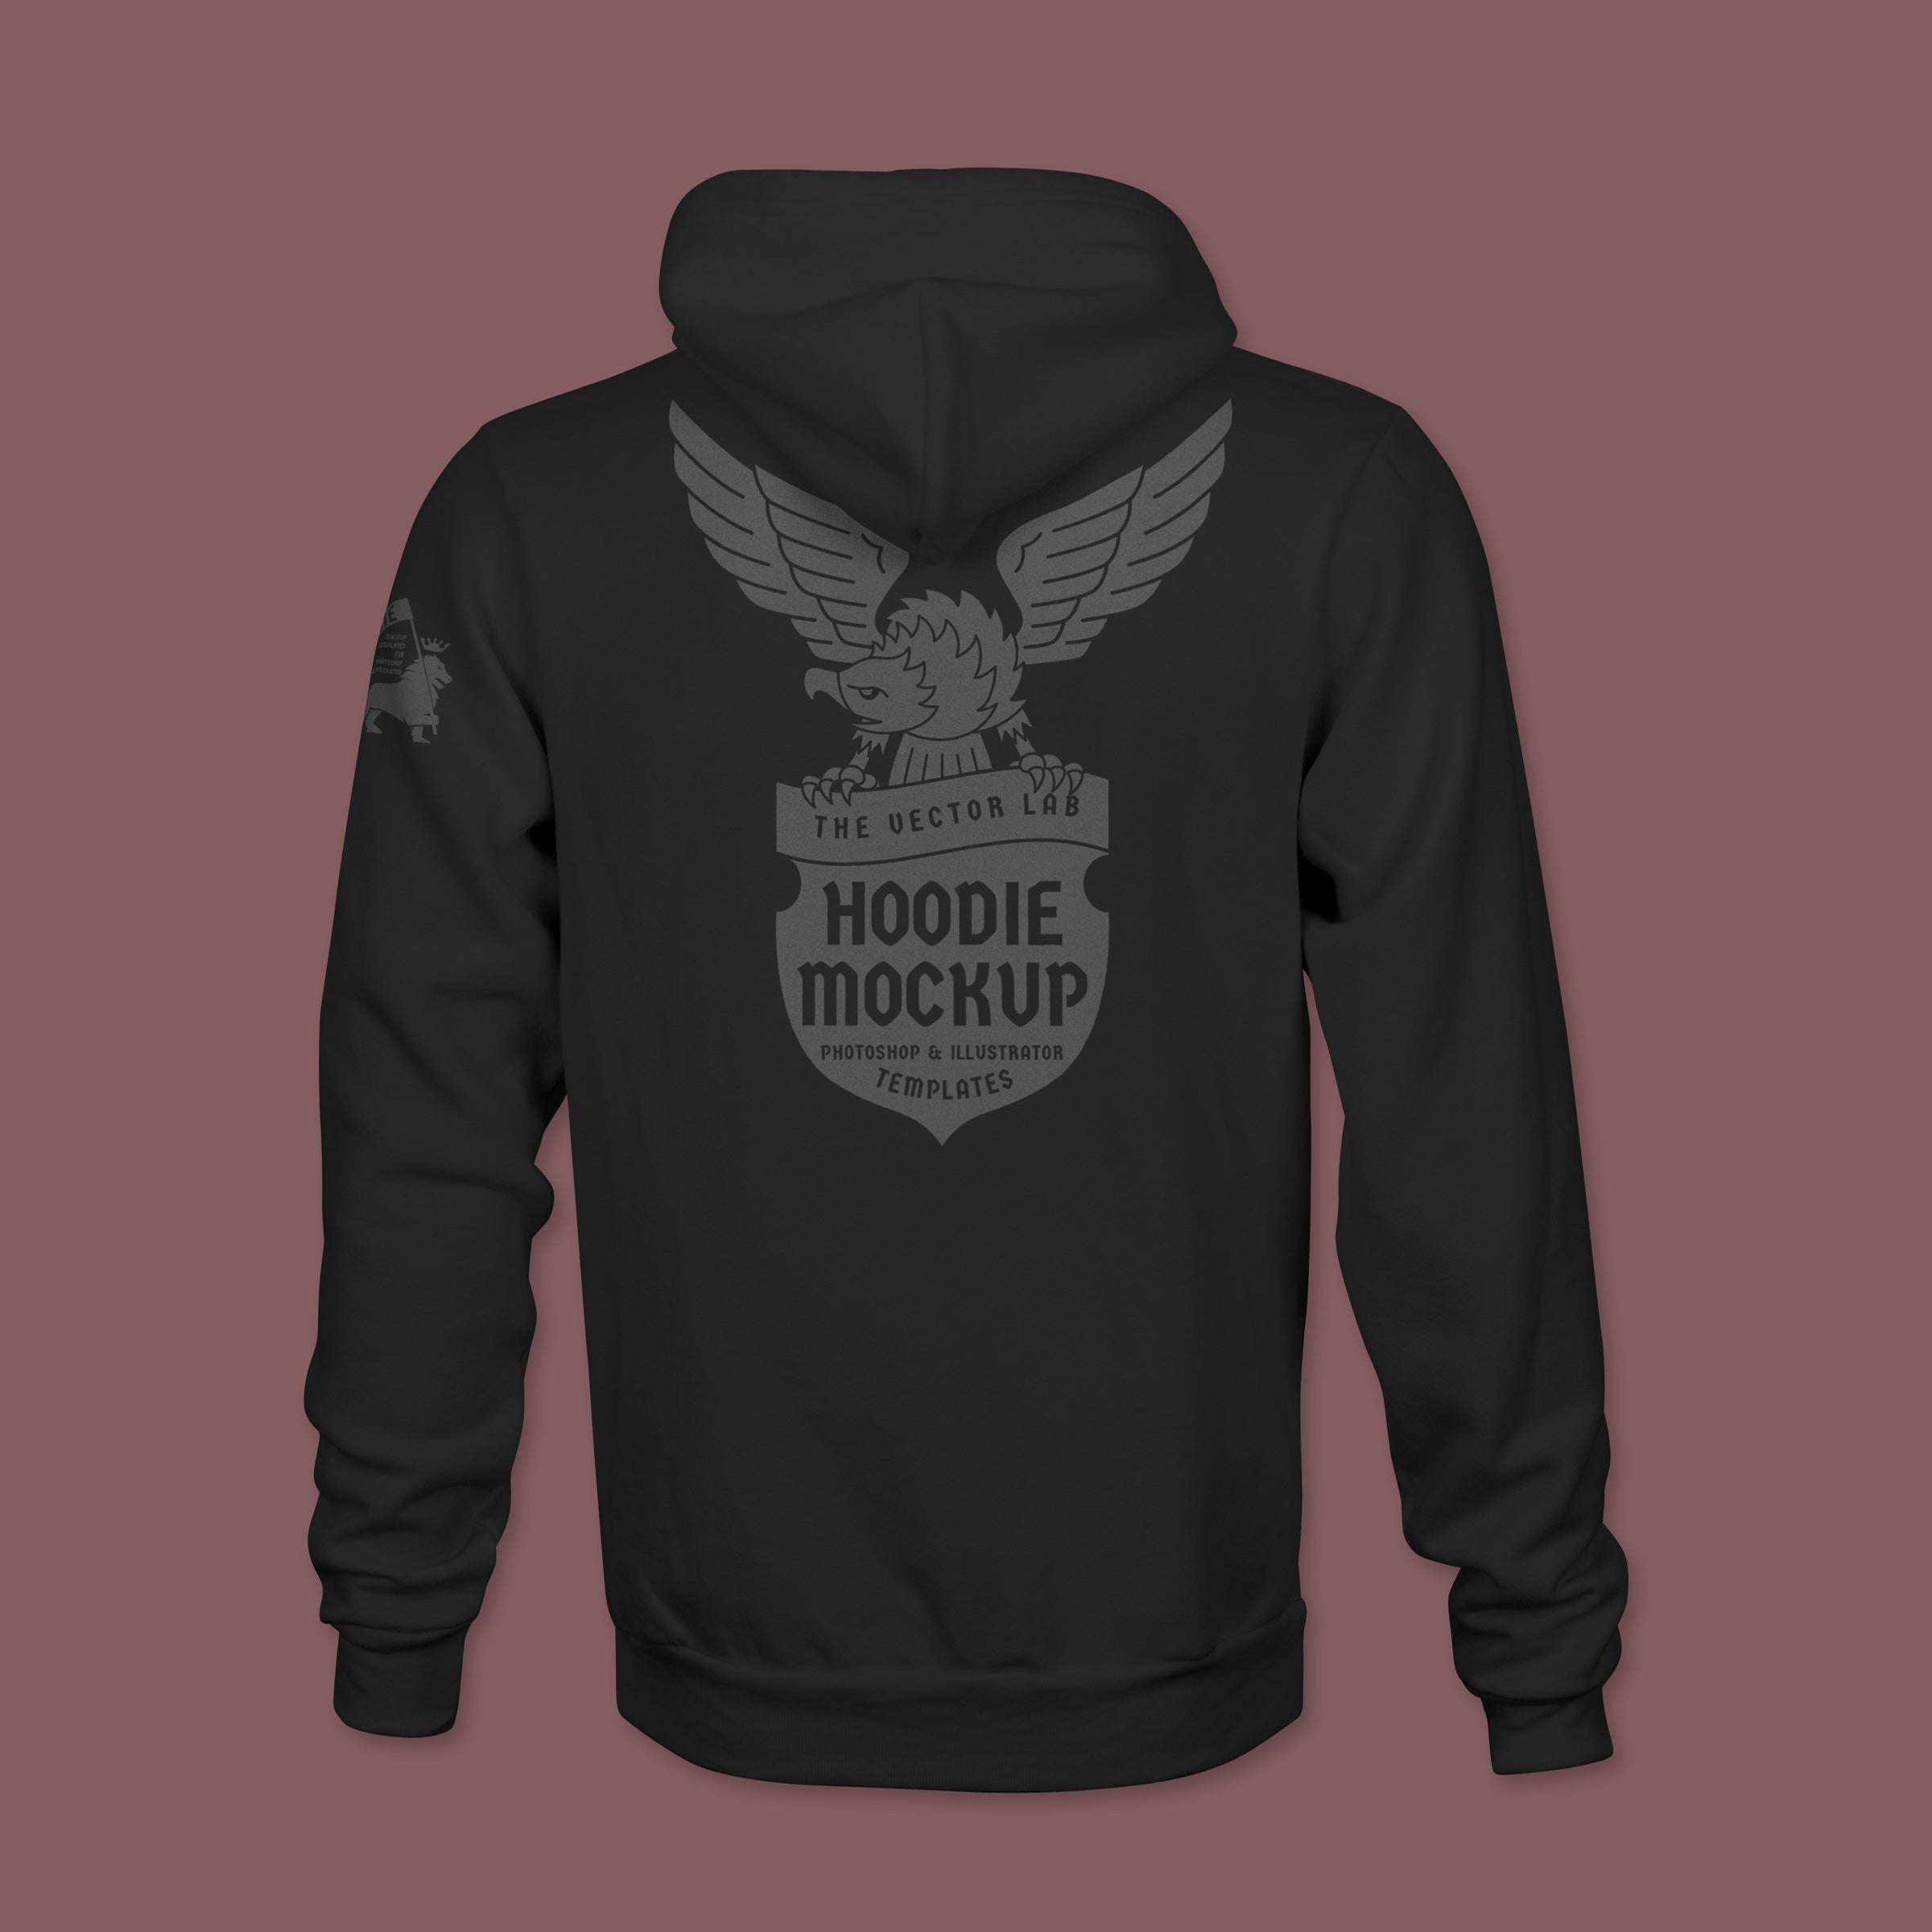 Download Men's Hoodie Mockup Templates - TheVectorLab